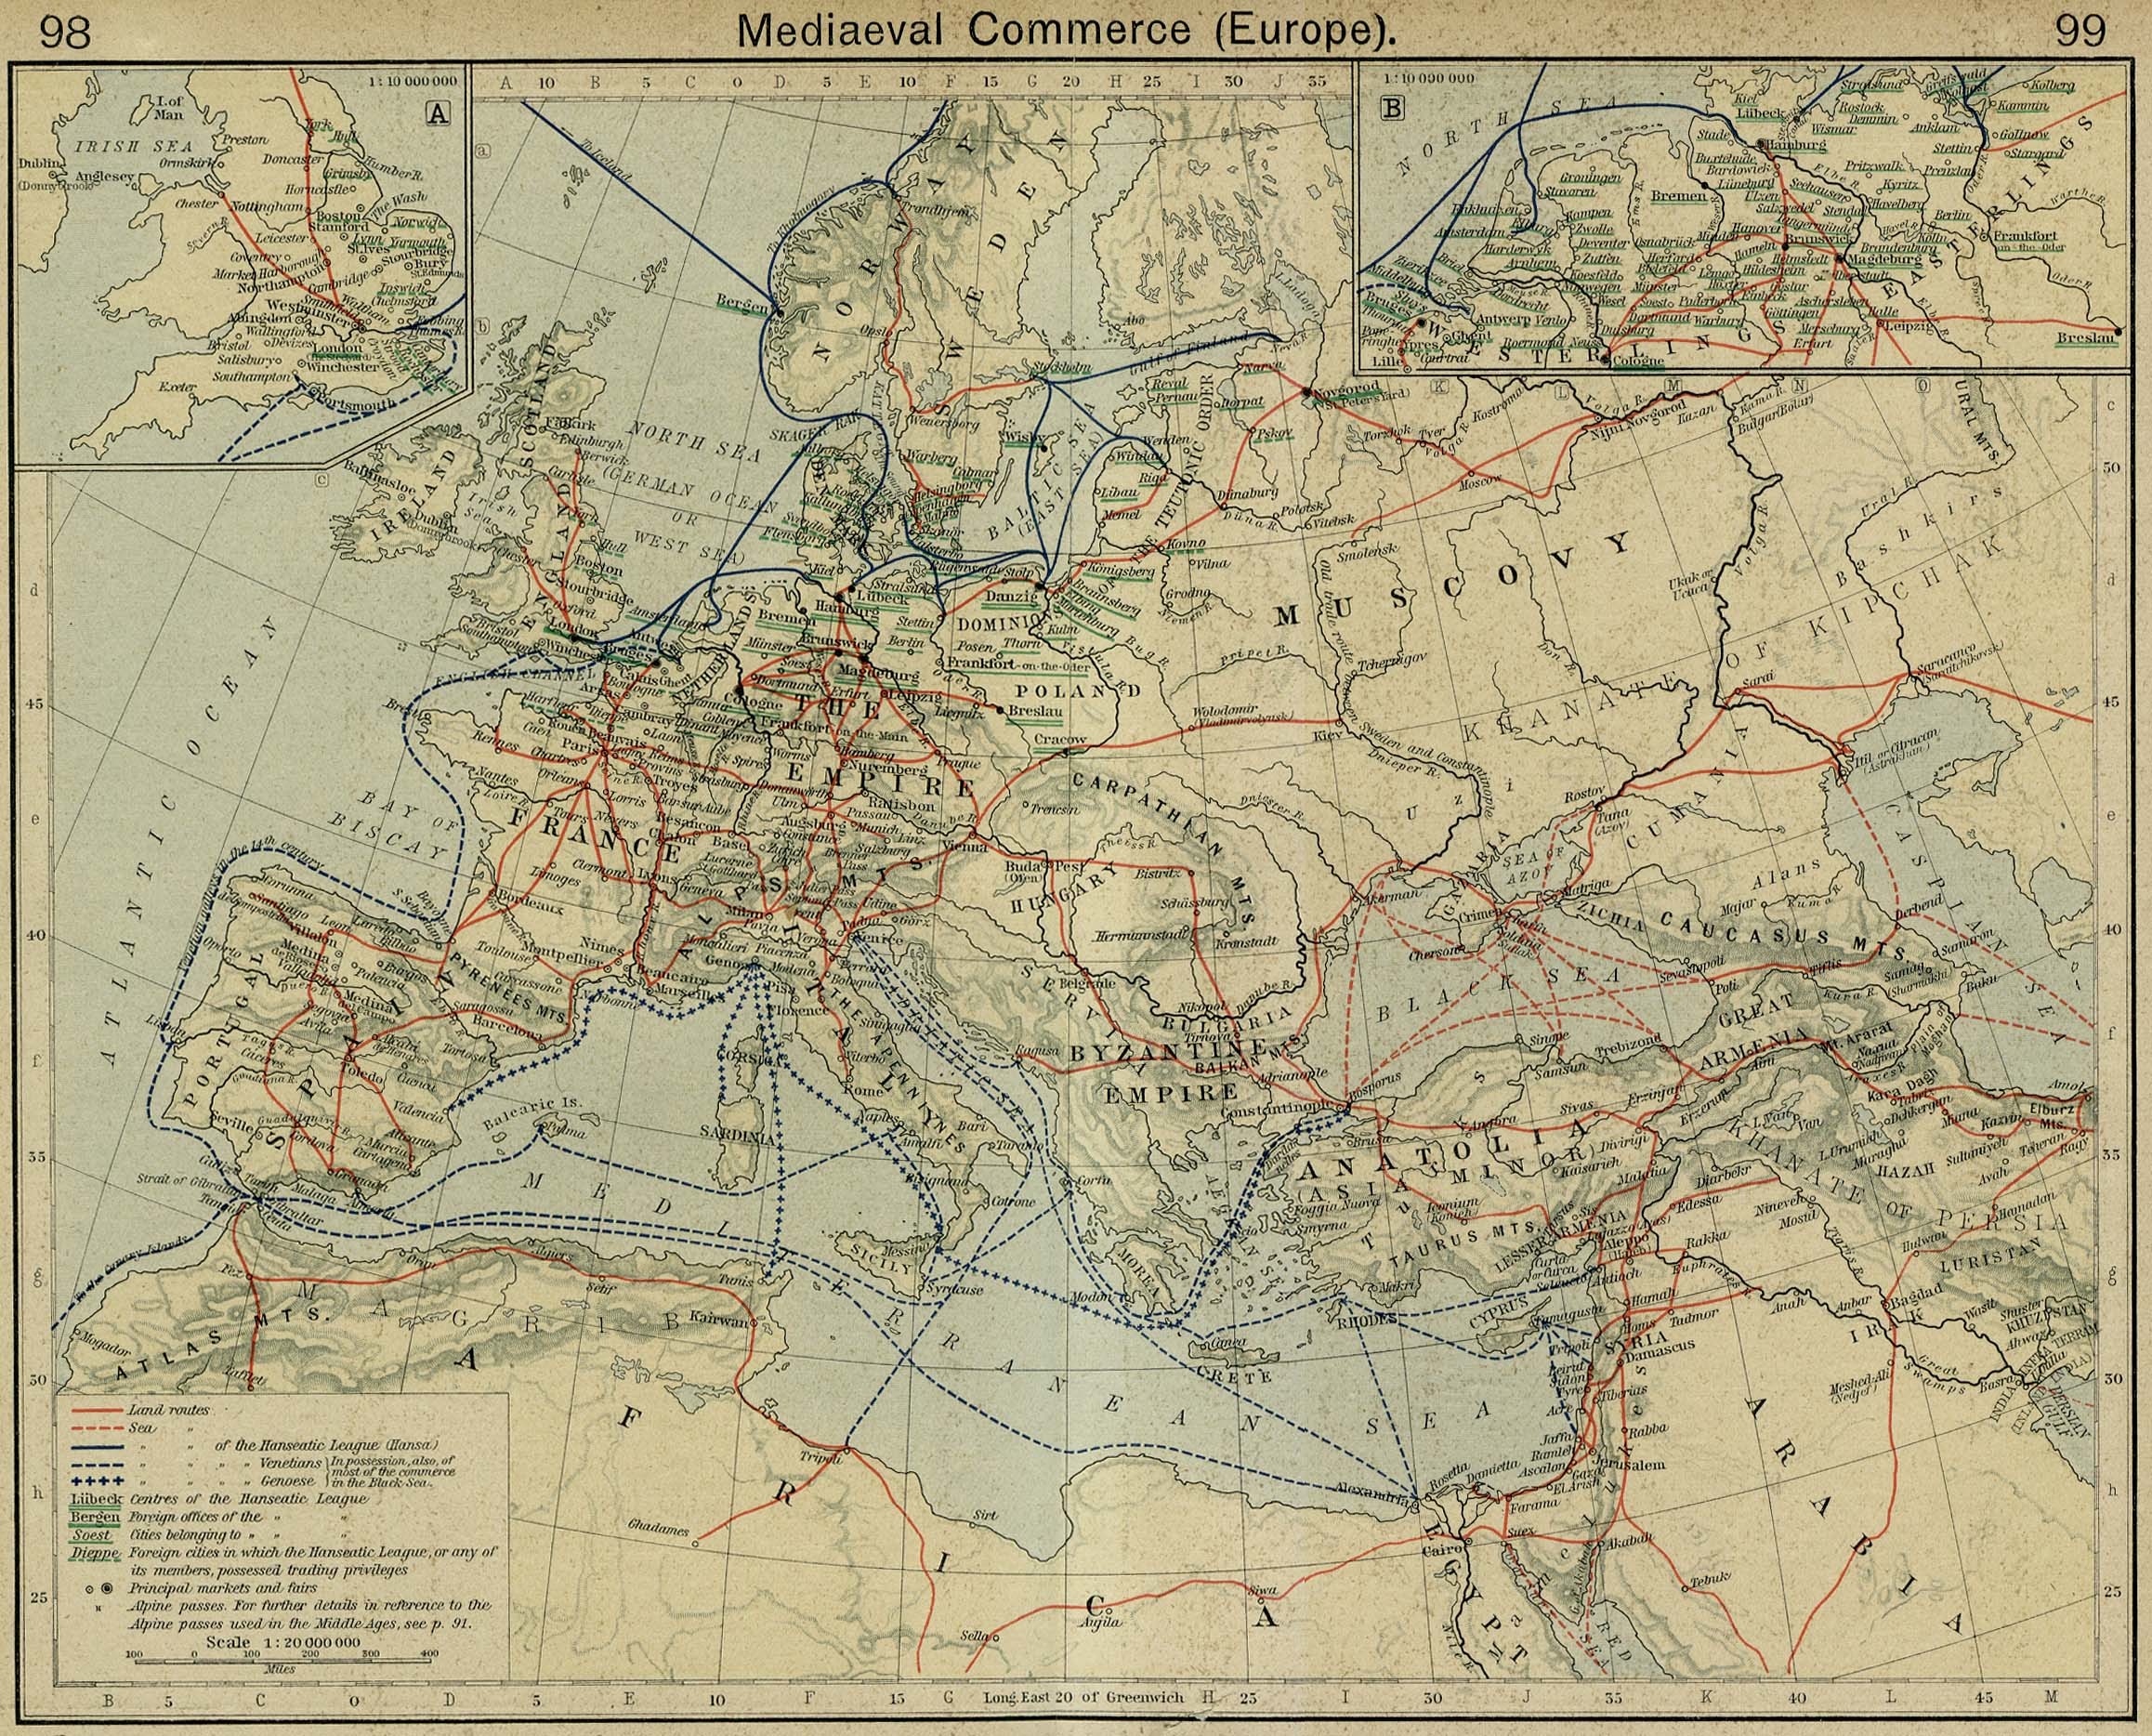 2316x1868 Europe Maps Wallpaper  Europe, Maps, Medieval, Cartography